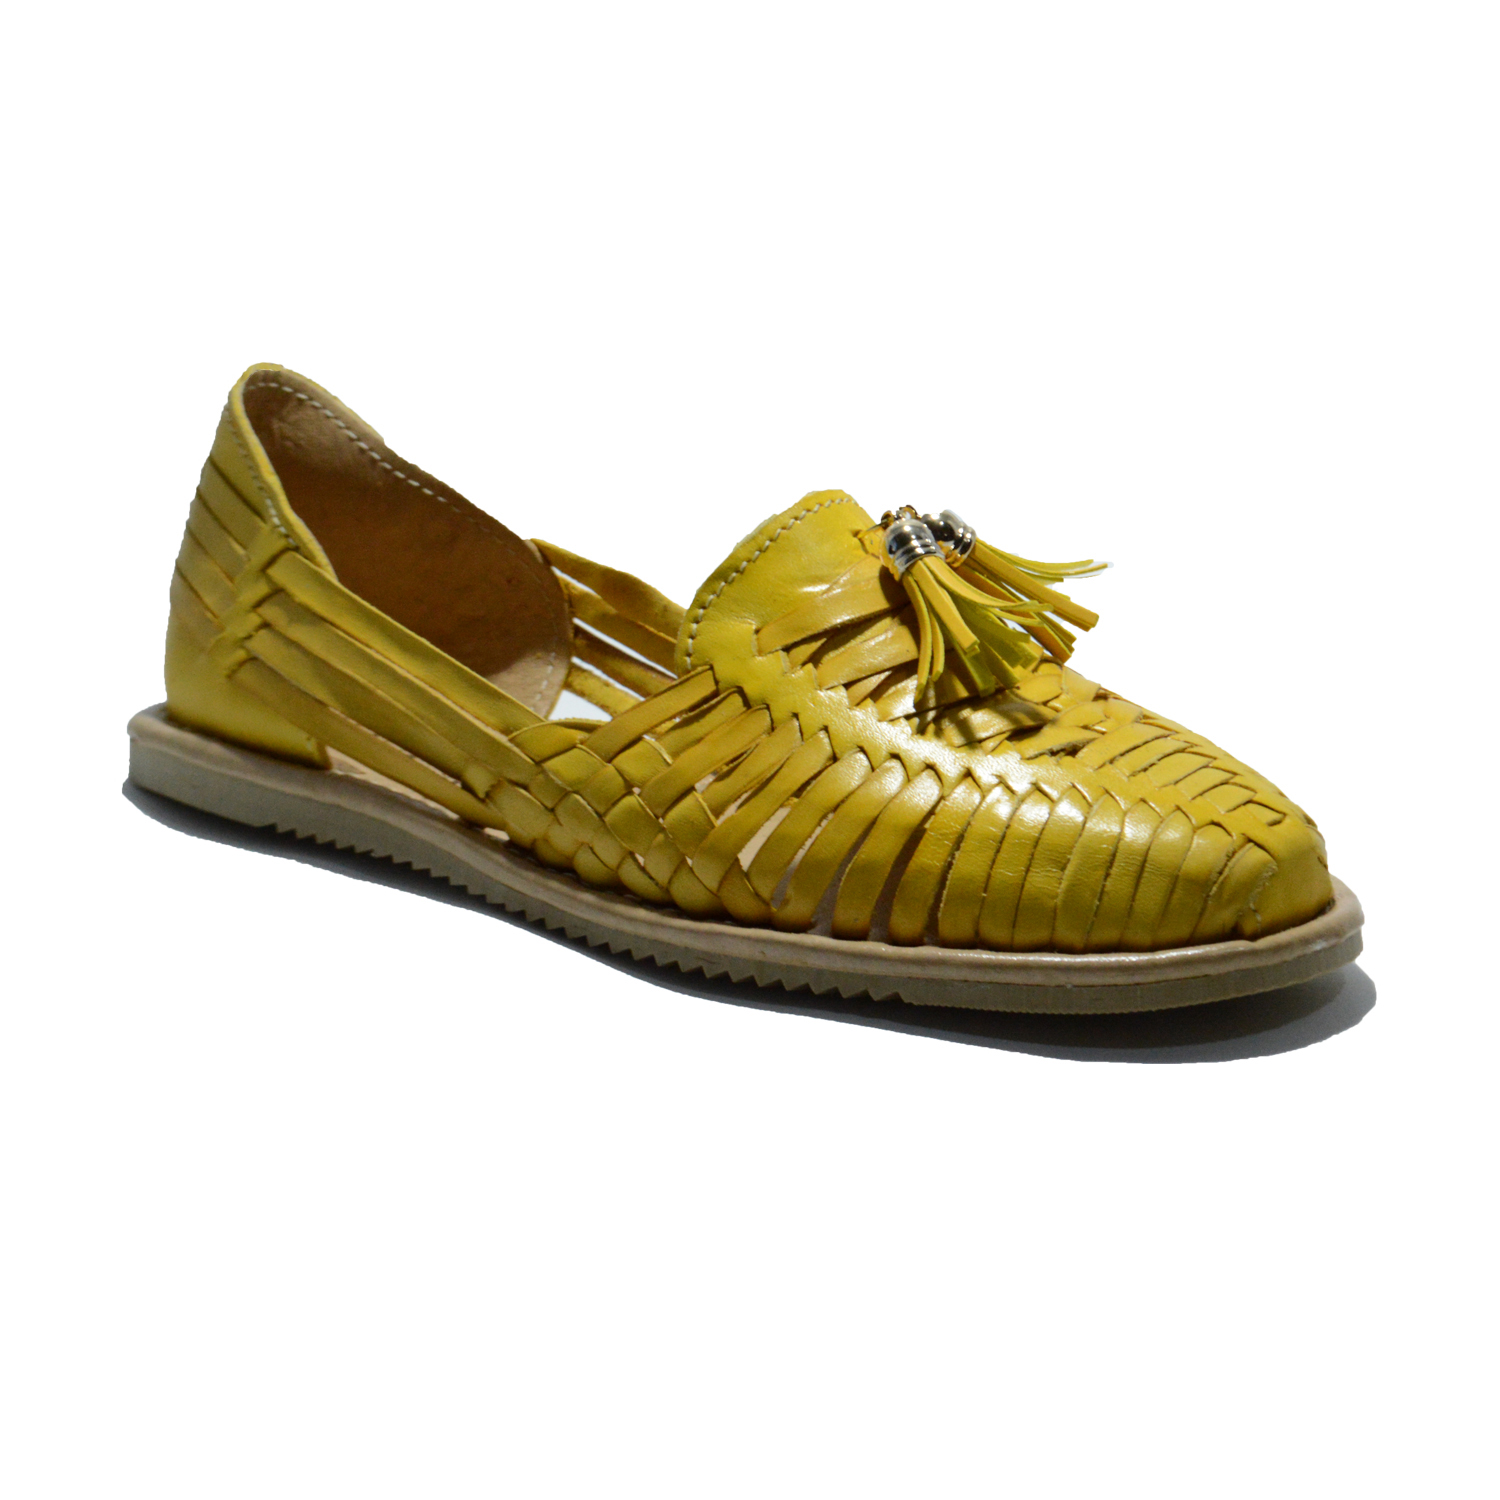 Leather Mexican Sandals For Woman Huaraches Amarillo Des-037-2